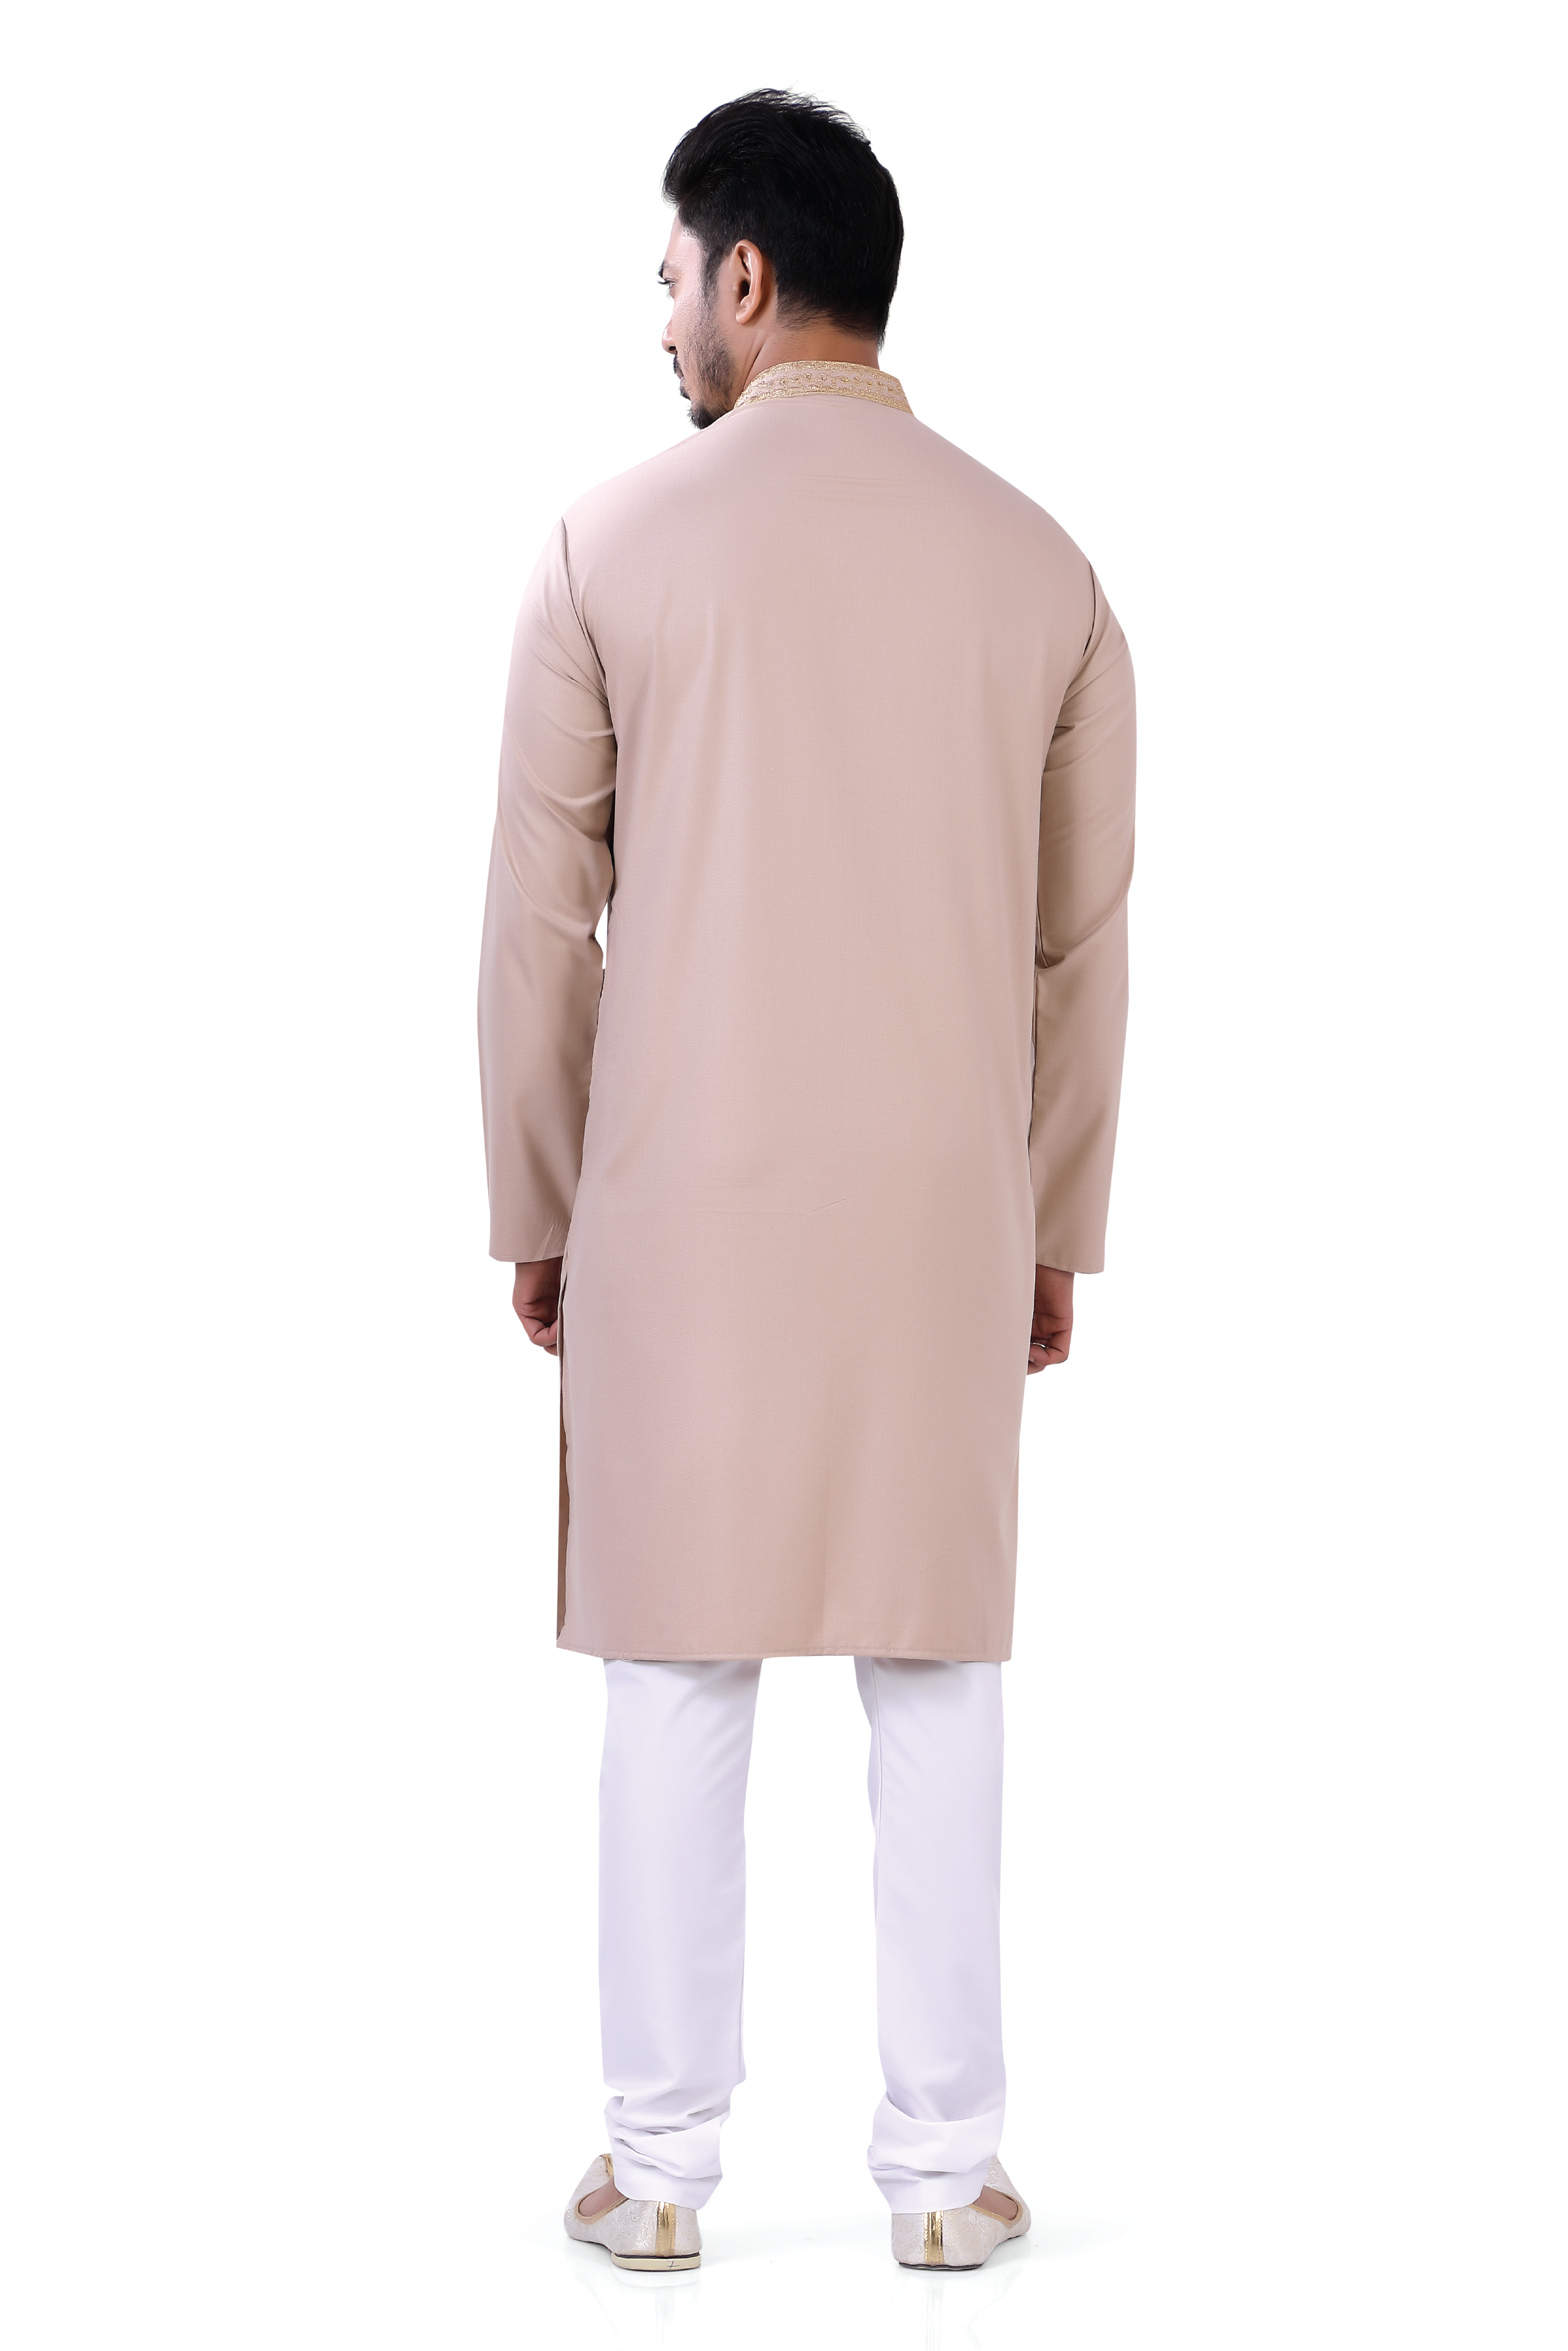 Cotton Anchor embroidery Kurta Pajama in walnut color - Premium kurta pajama from Dapper Ethnic - Just $79! Shop now at Dulhan Exclusives